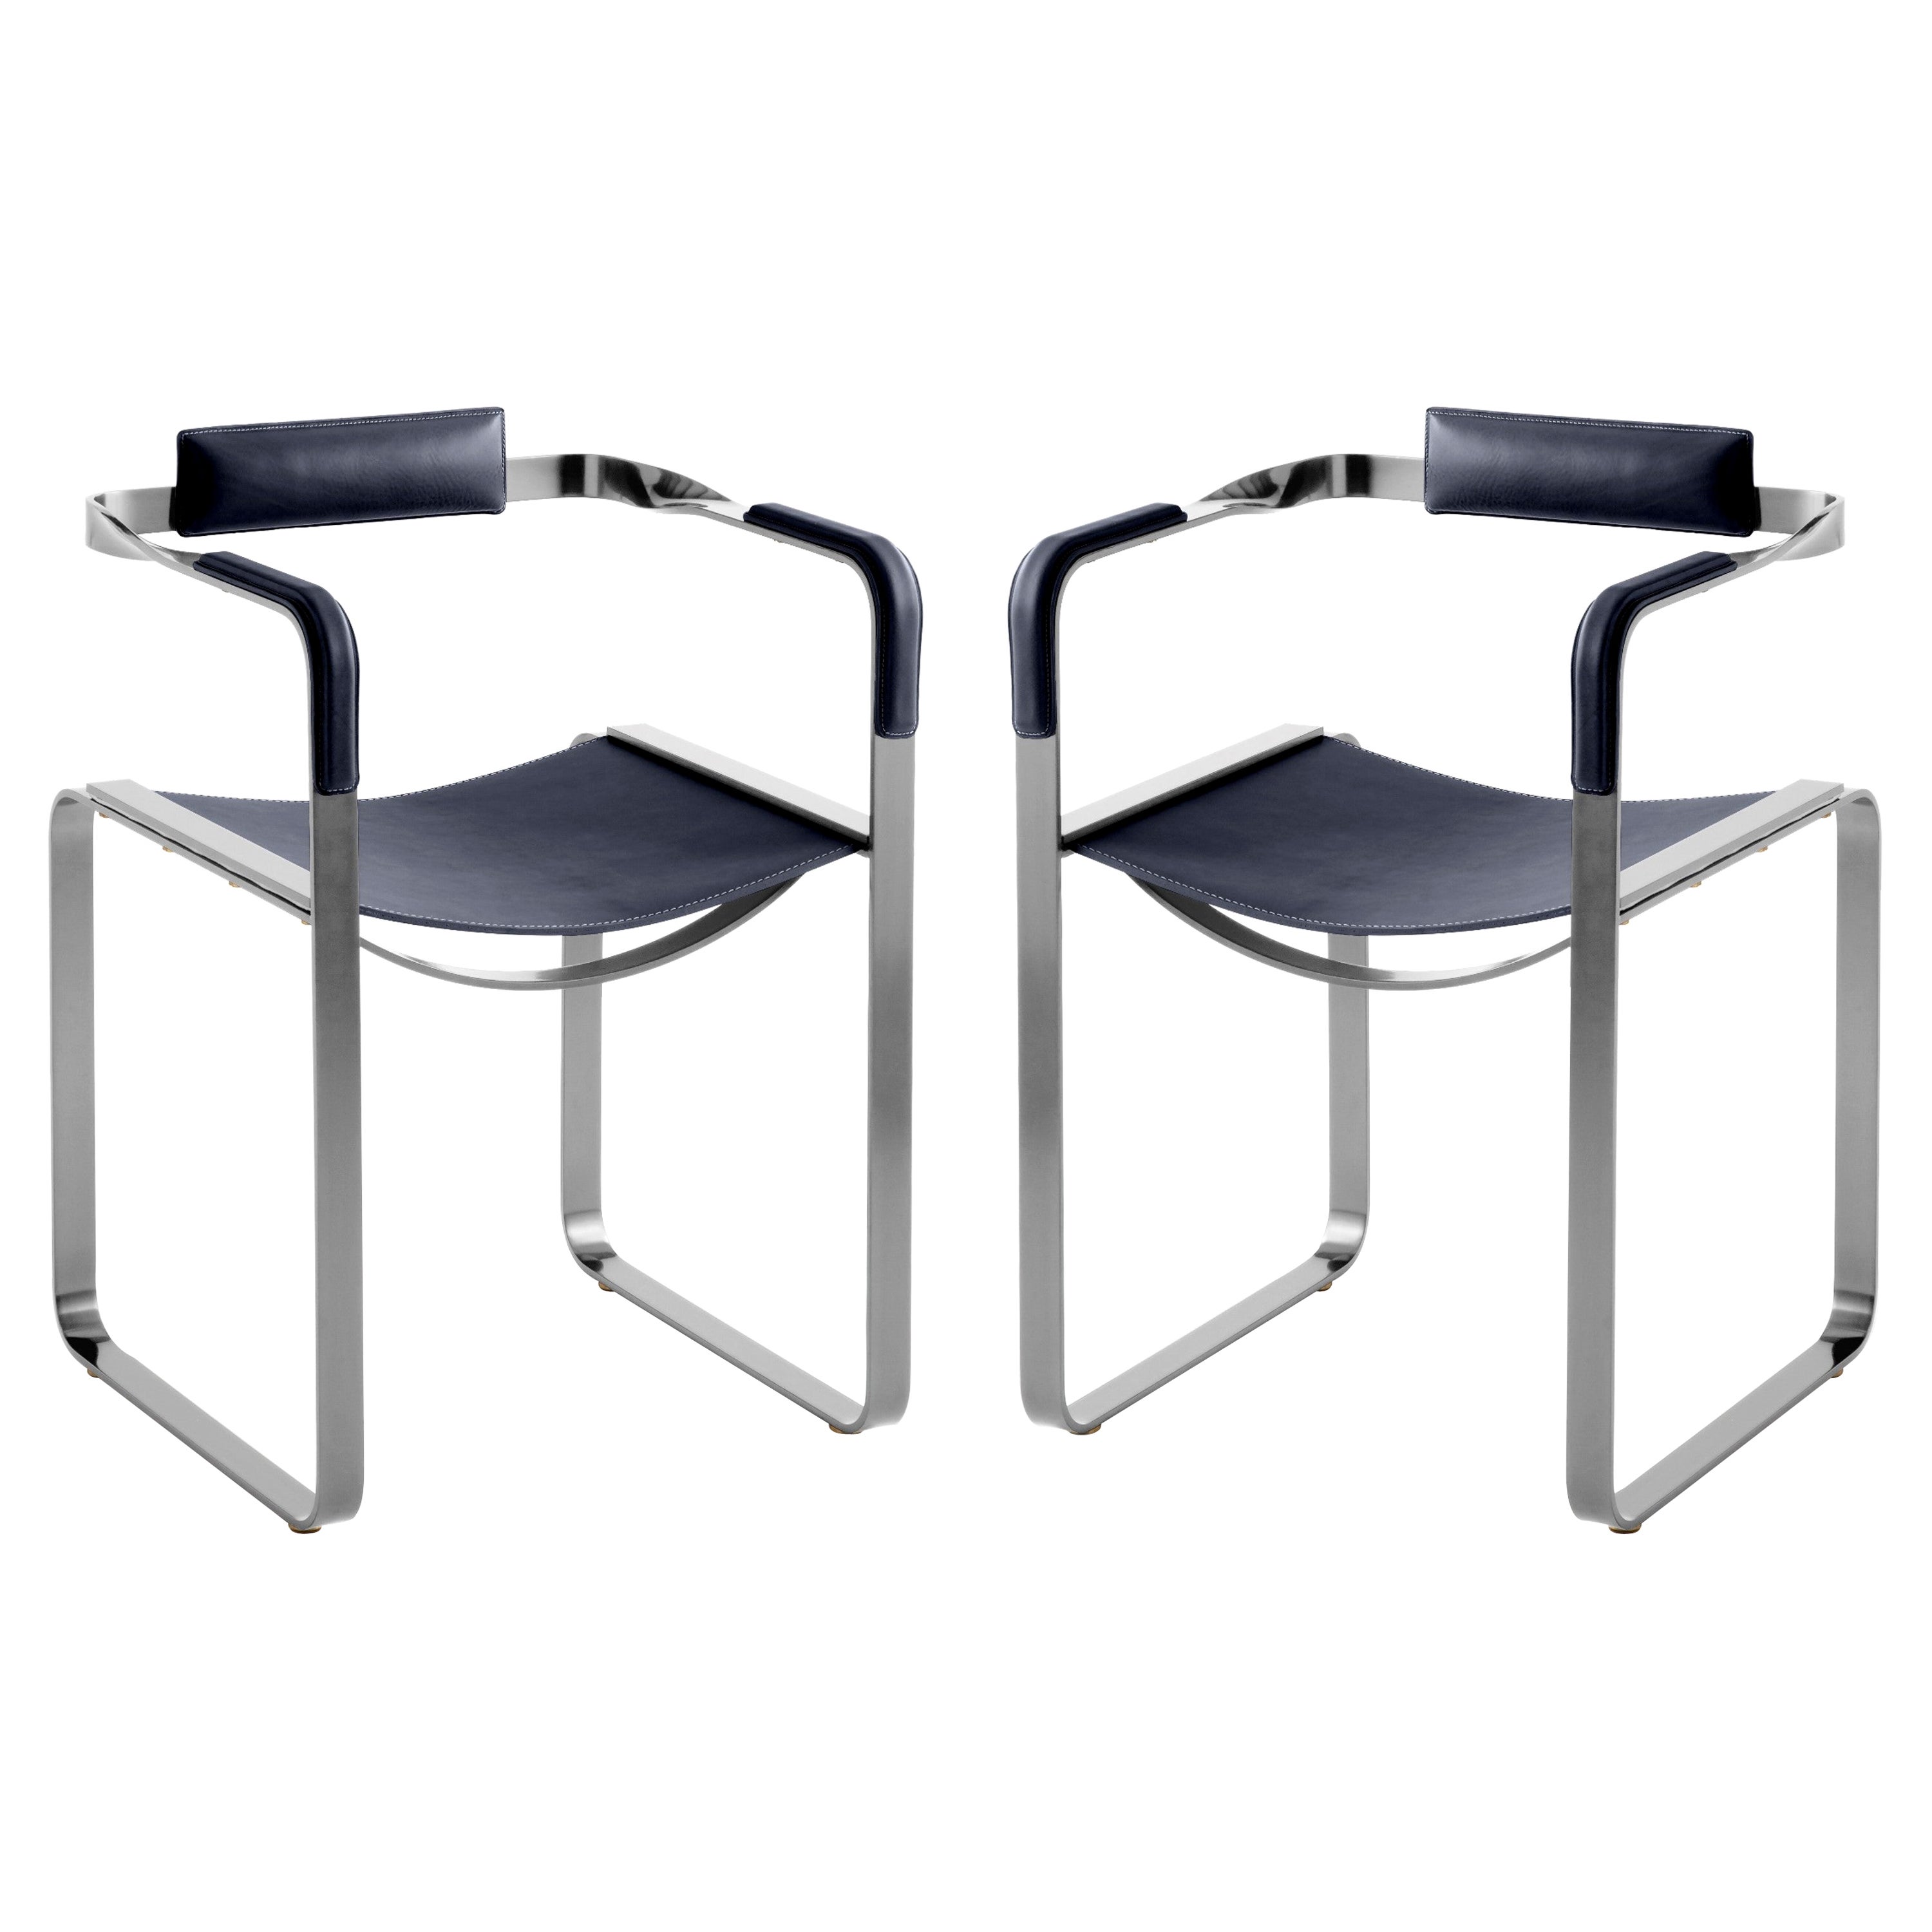 Set of 2, Armchair, Old Silver Steel & Navy Blue Saddle, Contemporary Style For Sale